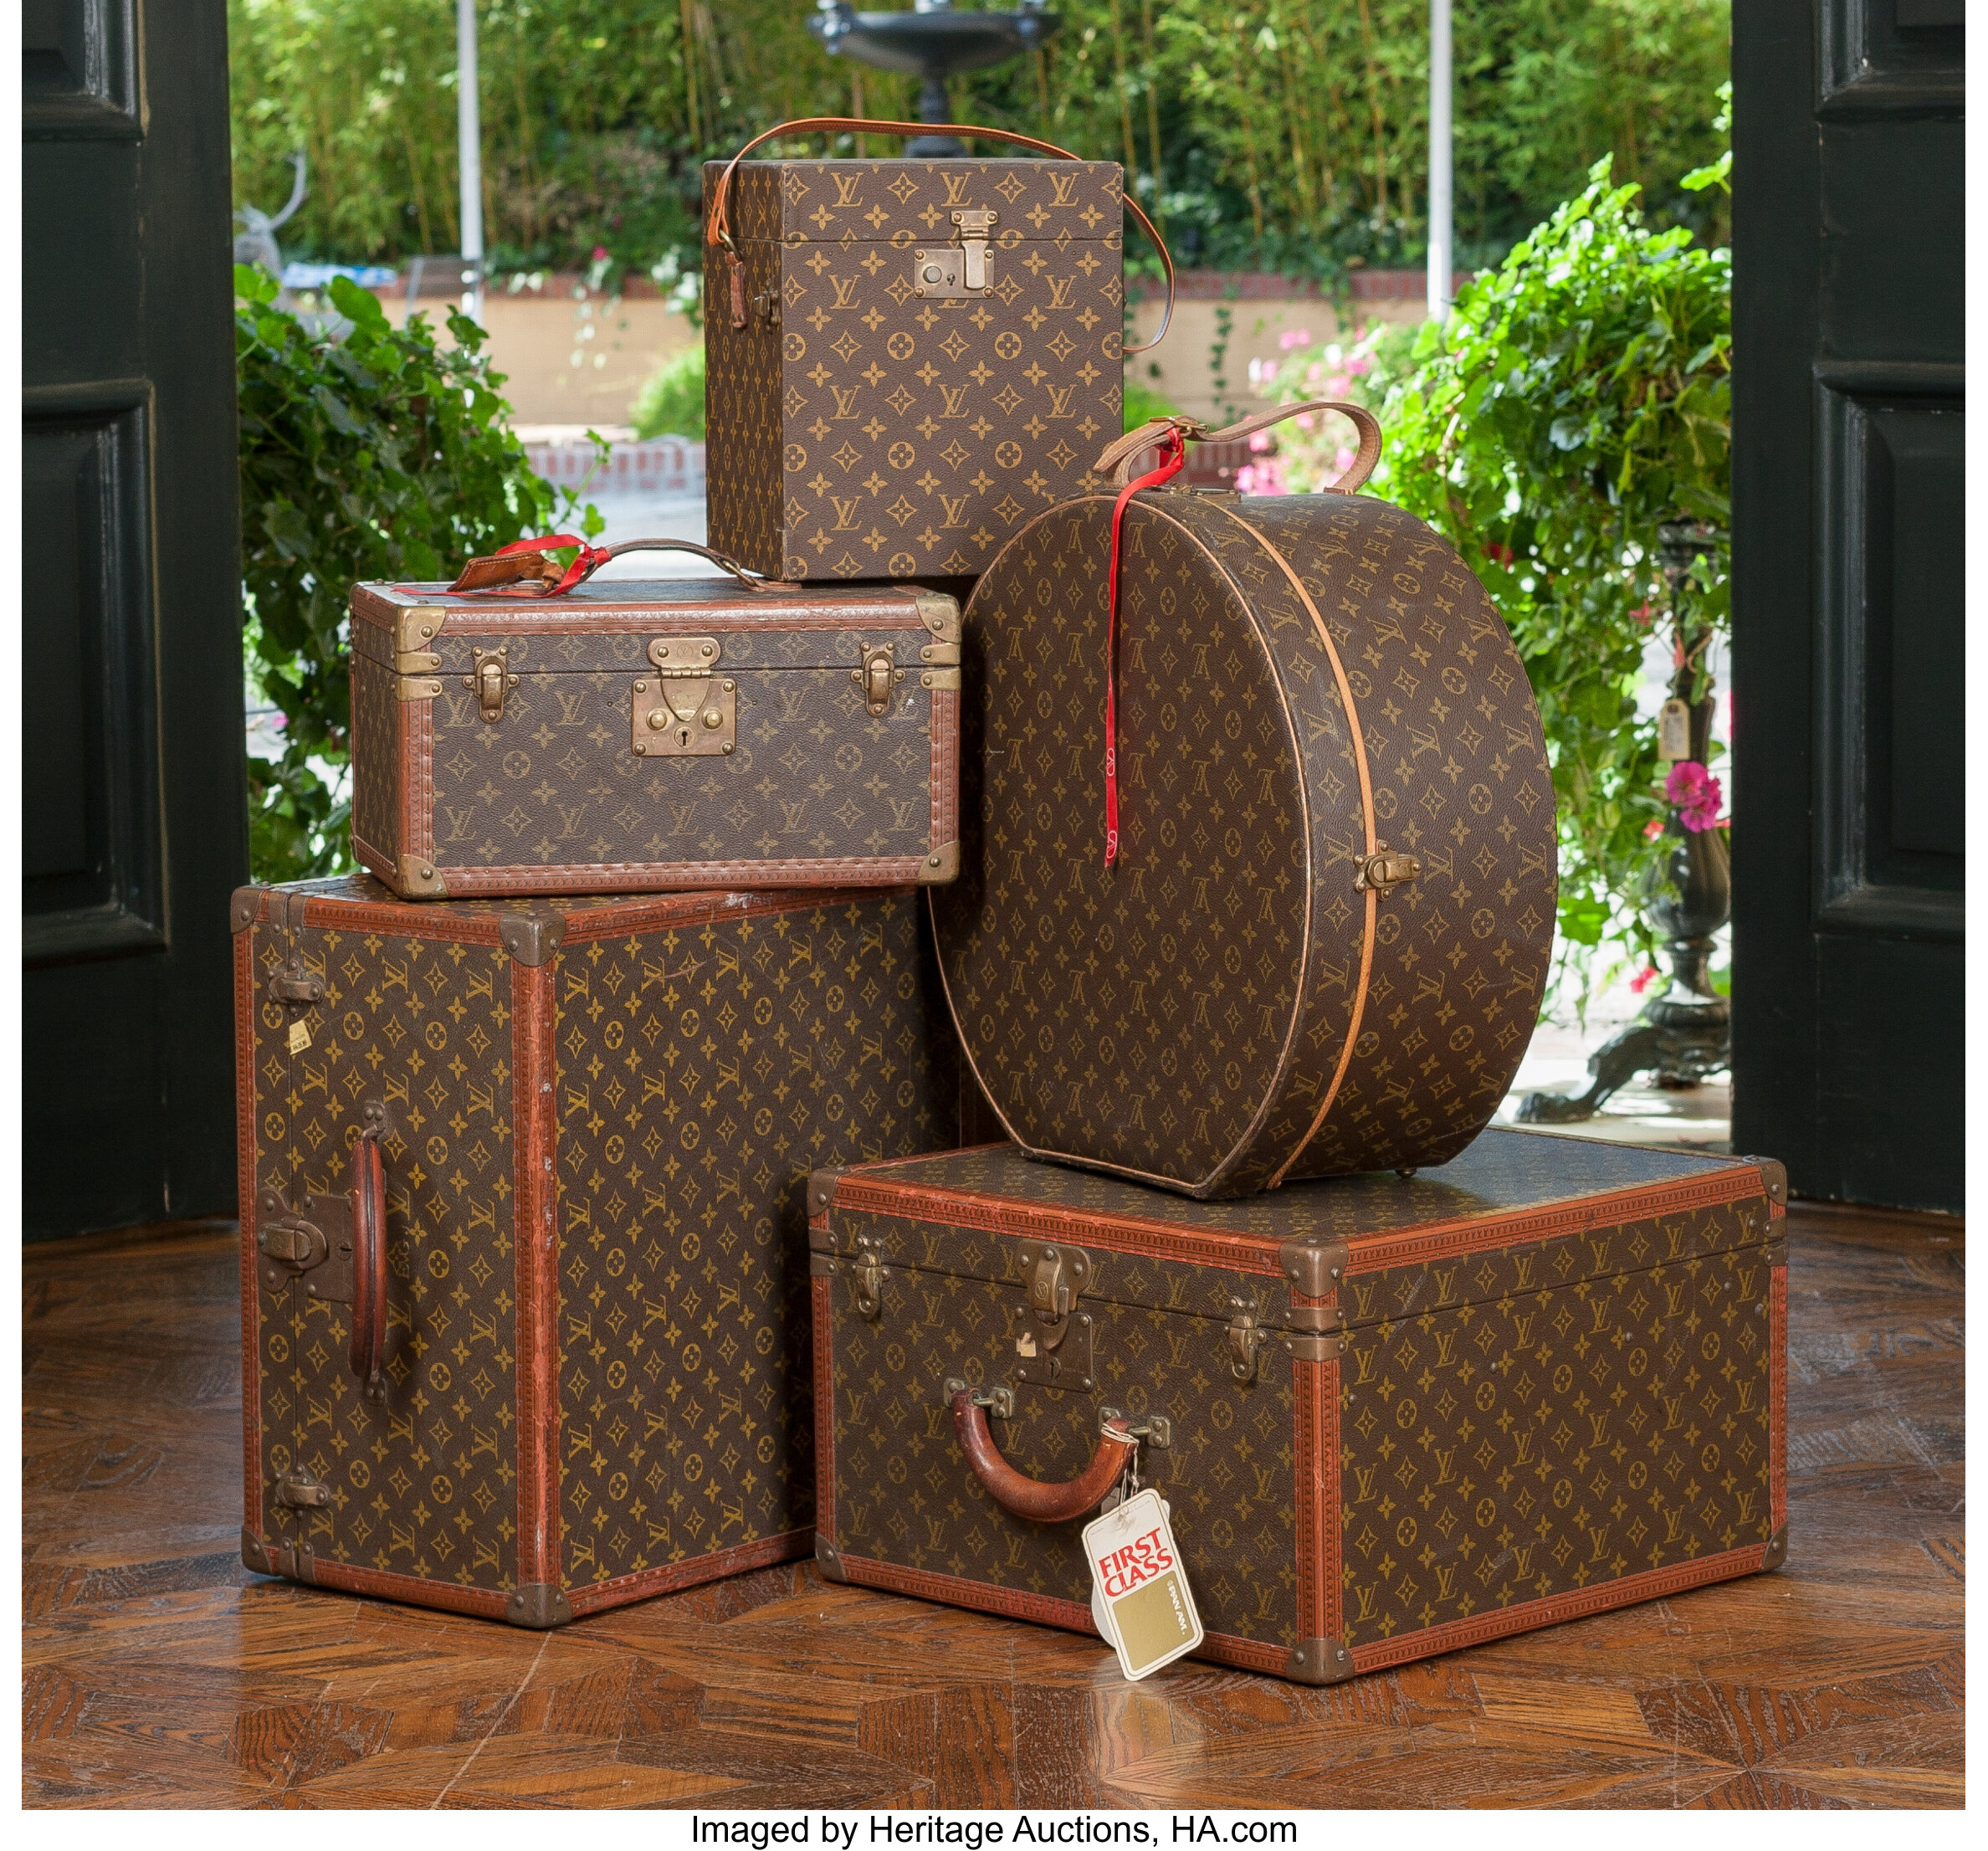 Ciro for ikke at nævne Plante A Five-Piece Louis Vuitton Classic Monogram Canvas Hard Travel Case | Lot  #65125 | Heritage Auctions